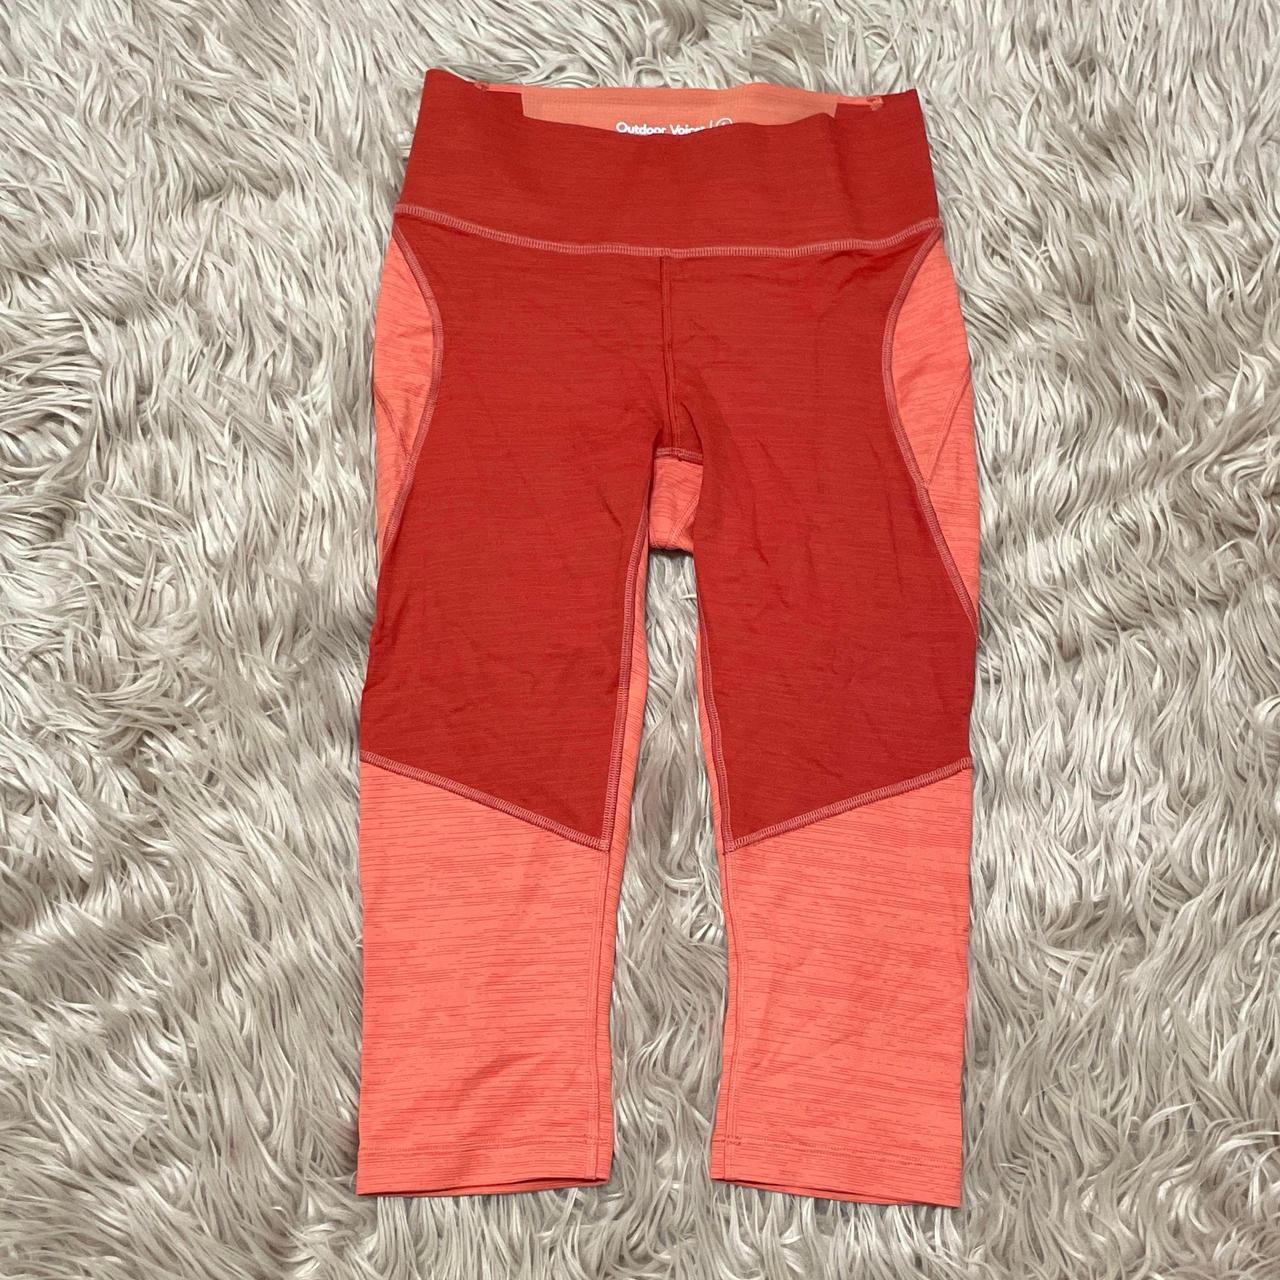 Awesome orange compression tights by outdoor voices. - Depop